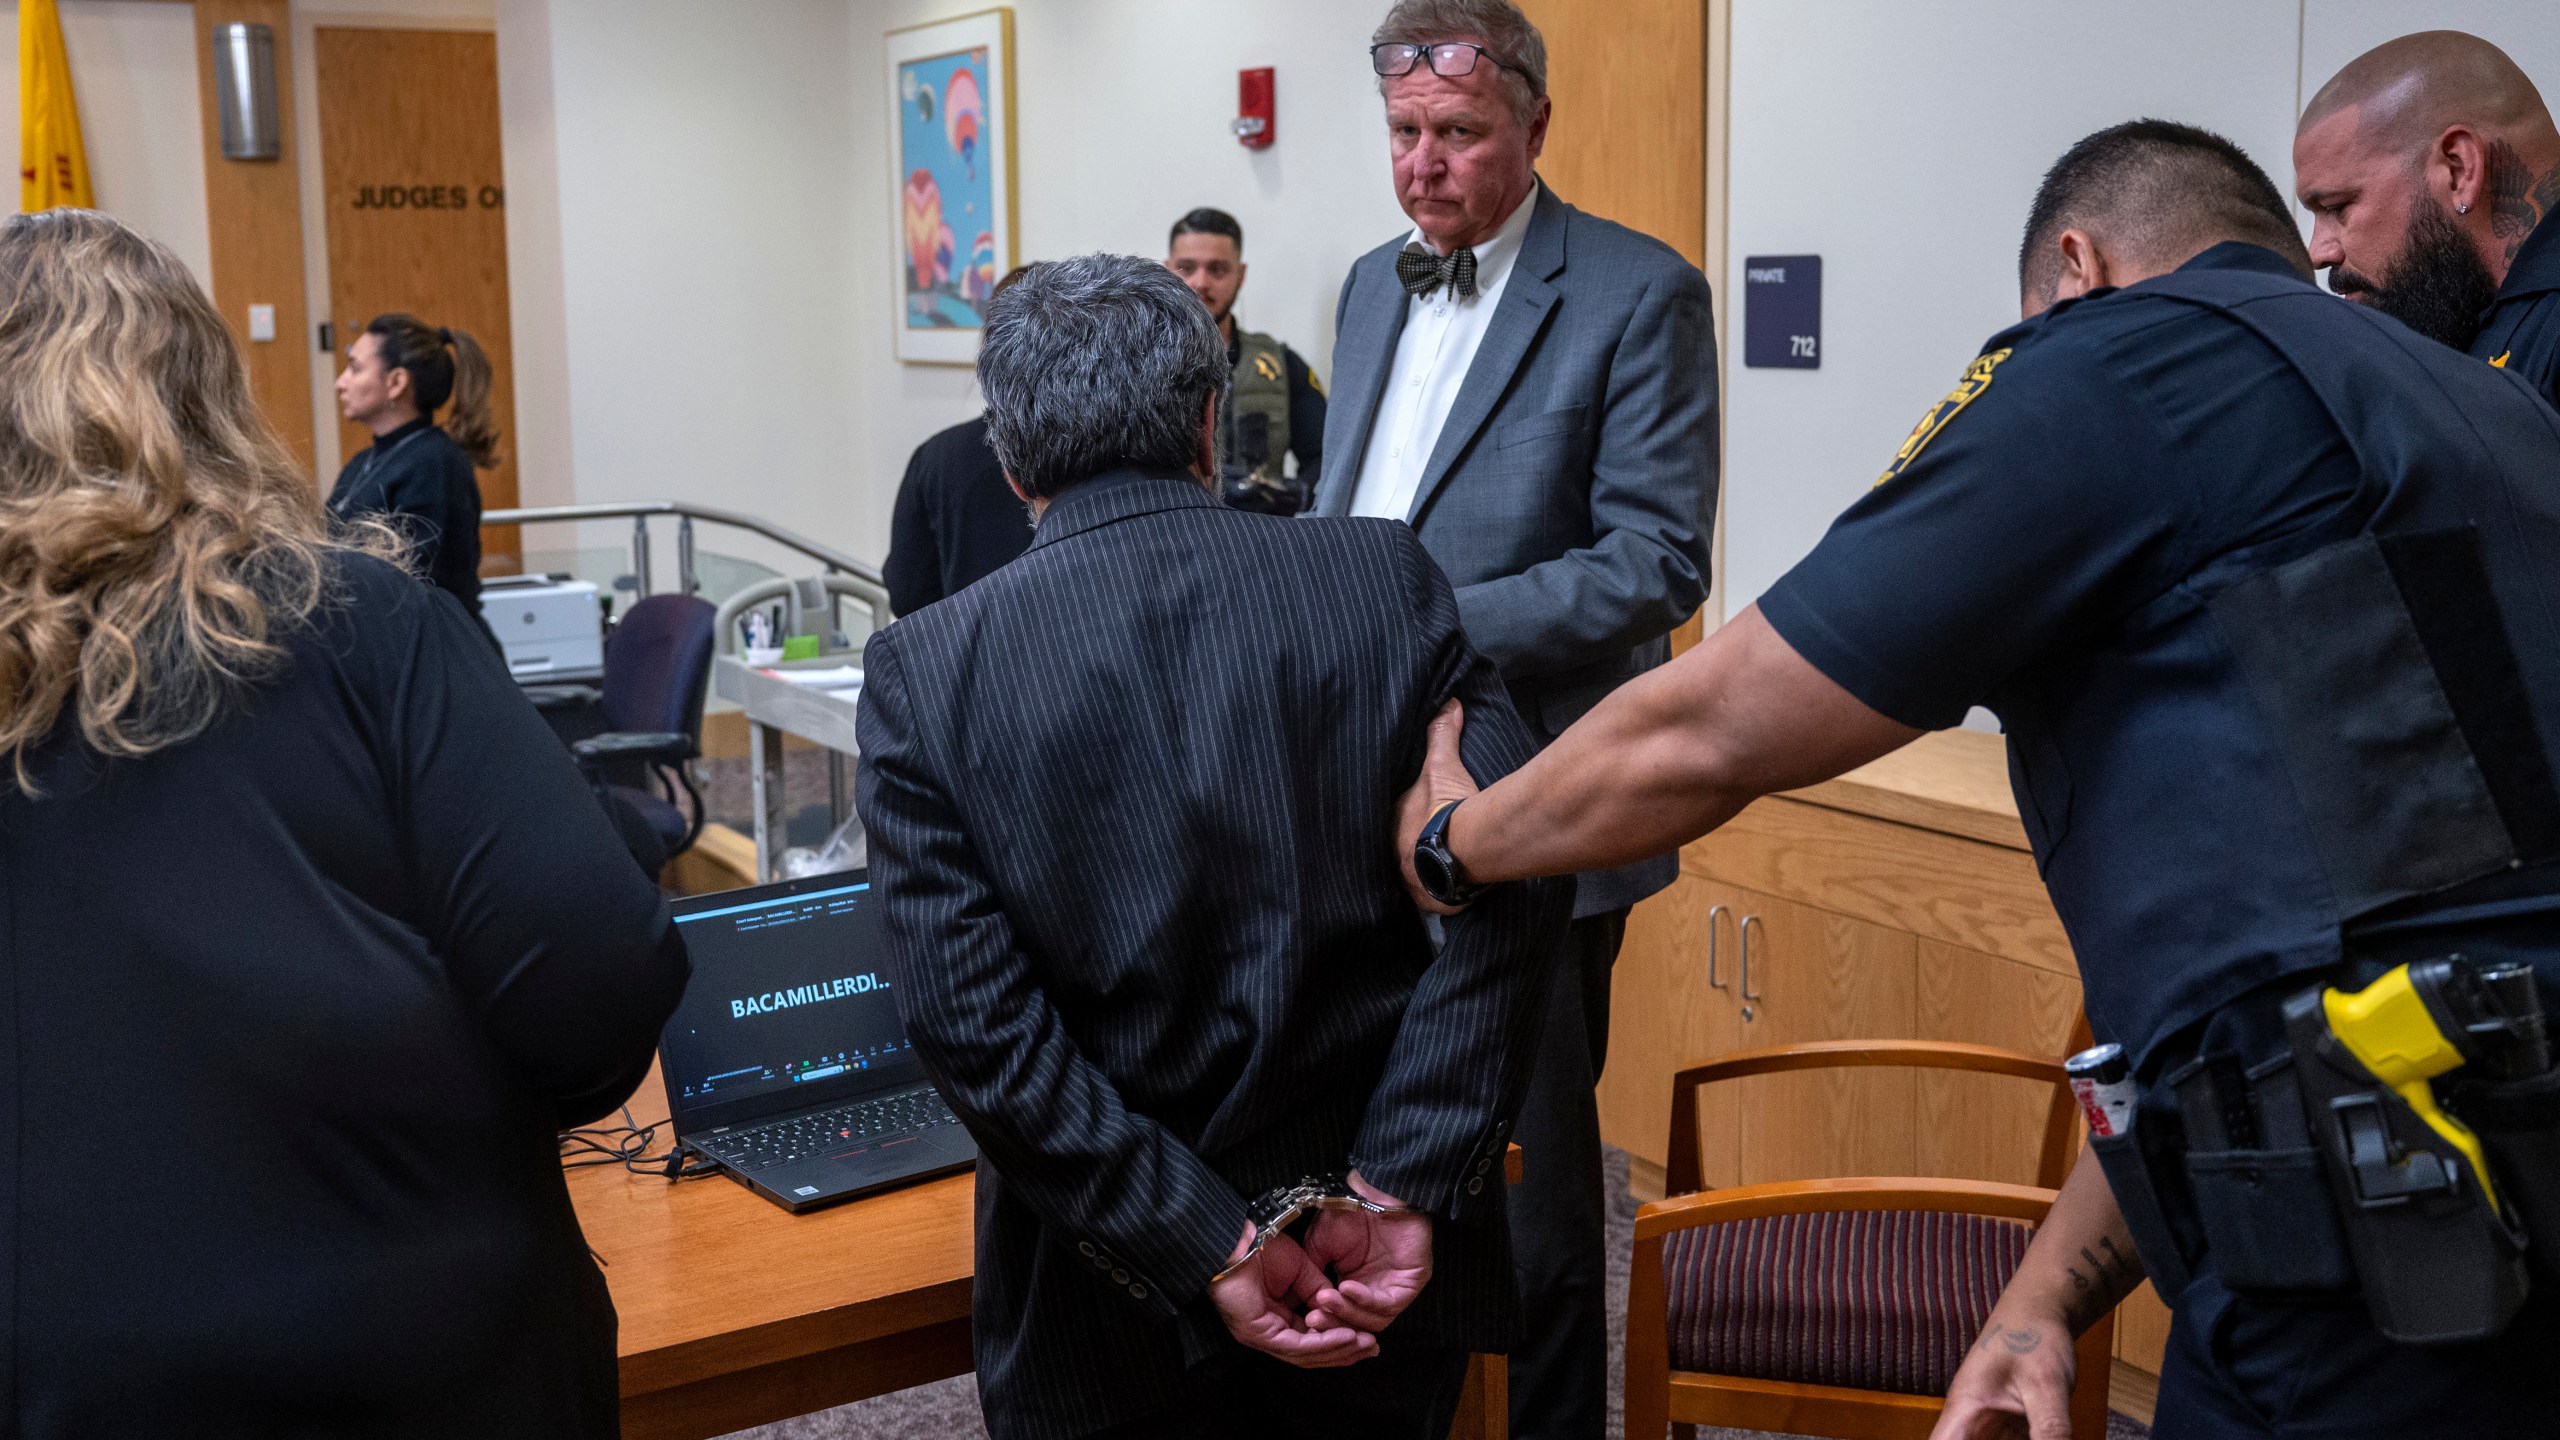 Muhammed Syed, center, with his attorney Thomas Clark, is taken into custody after he was convicted of killing Aftab Hussien in 2022, in Bernalillo County Courthouse in Albuquerque, N.M., Monday, March 18, 2024. (Eddie Moore/The Albuquerque Journal via AP)